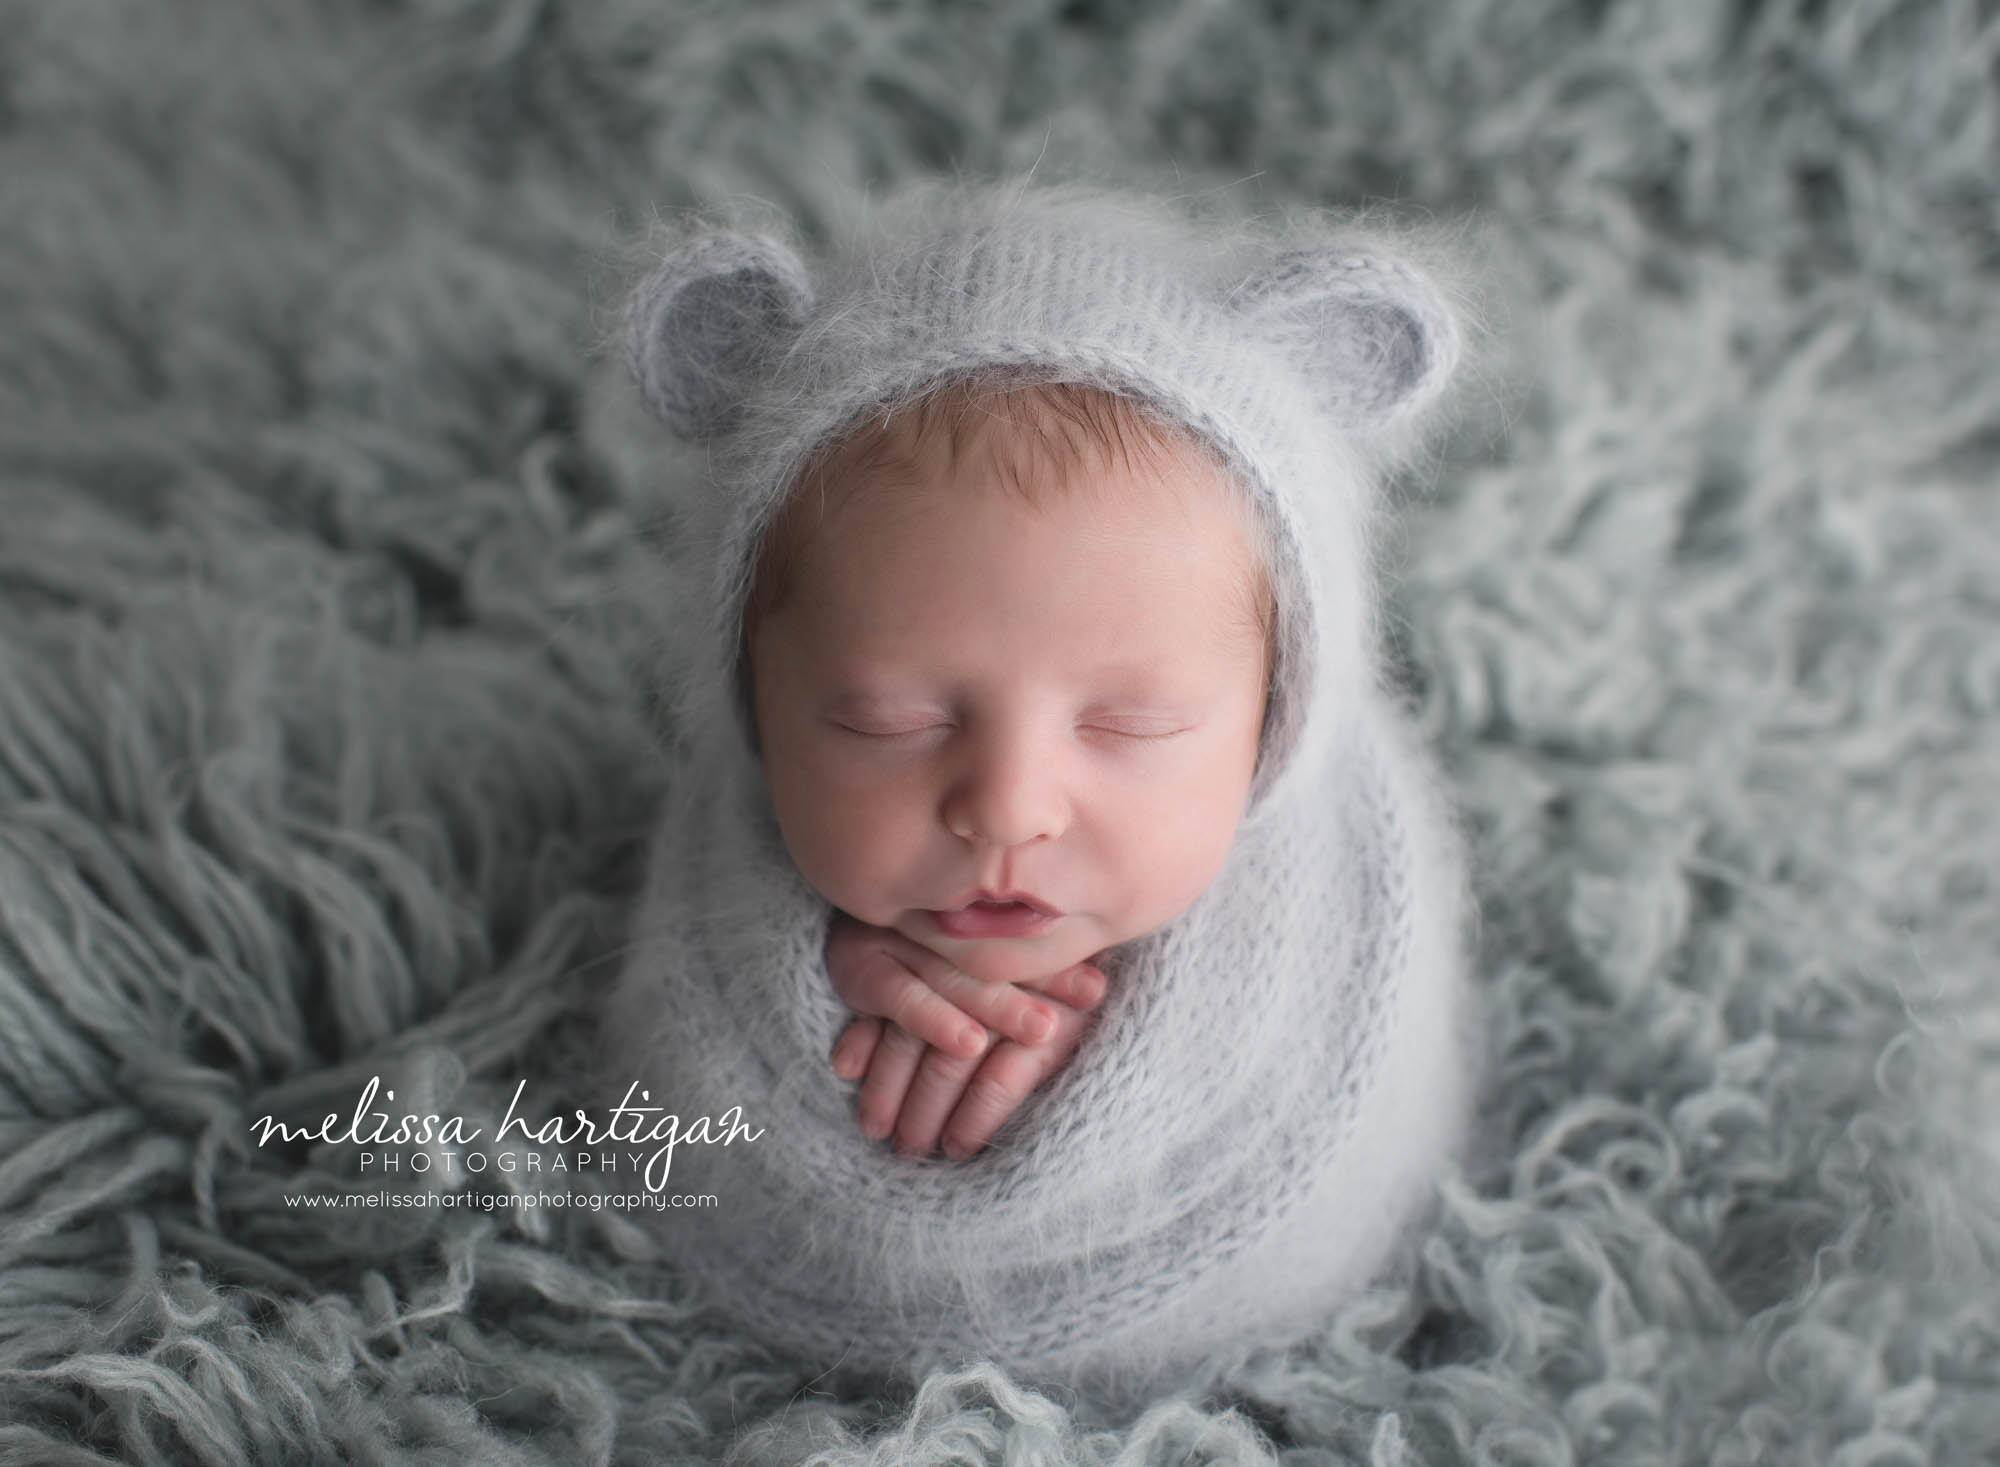 Melissa Hartigan Photography Coventry CT Newborn & Maternity Photographer Coventry CT Maternity Newborn Session Chase in gray wrap sleeping with bear ears knit hat